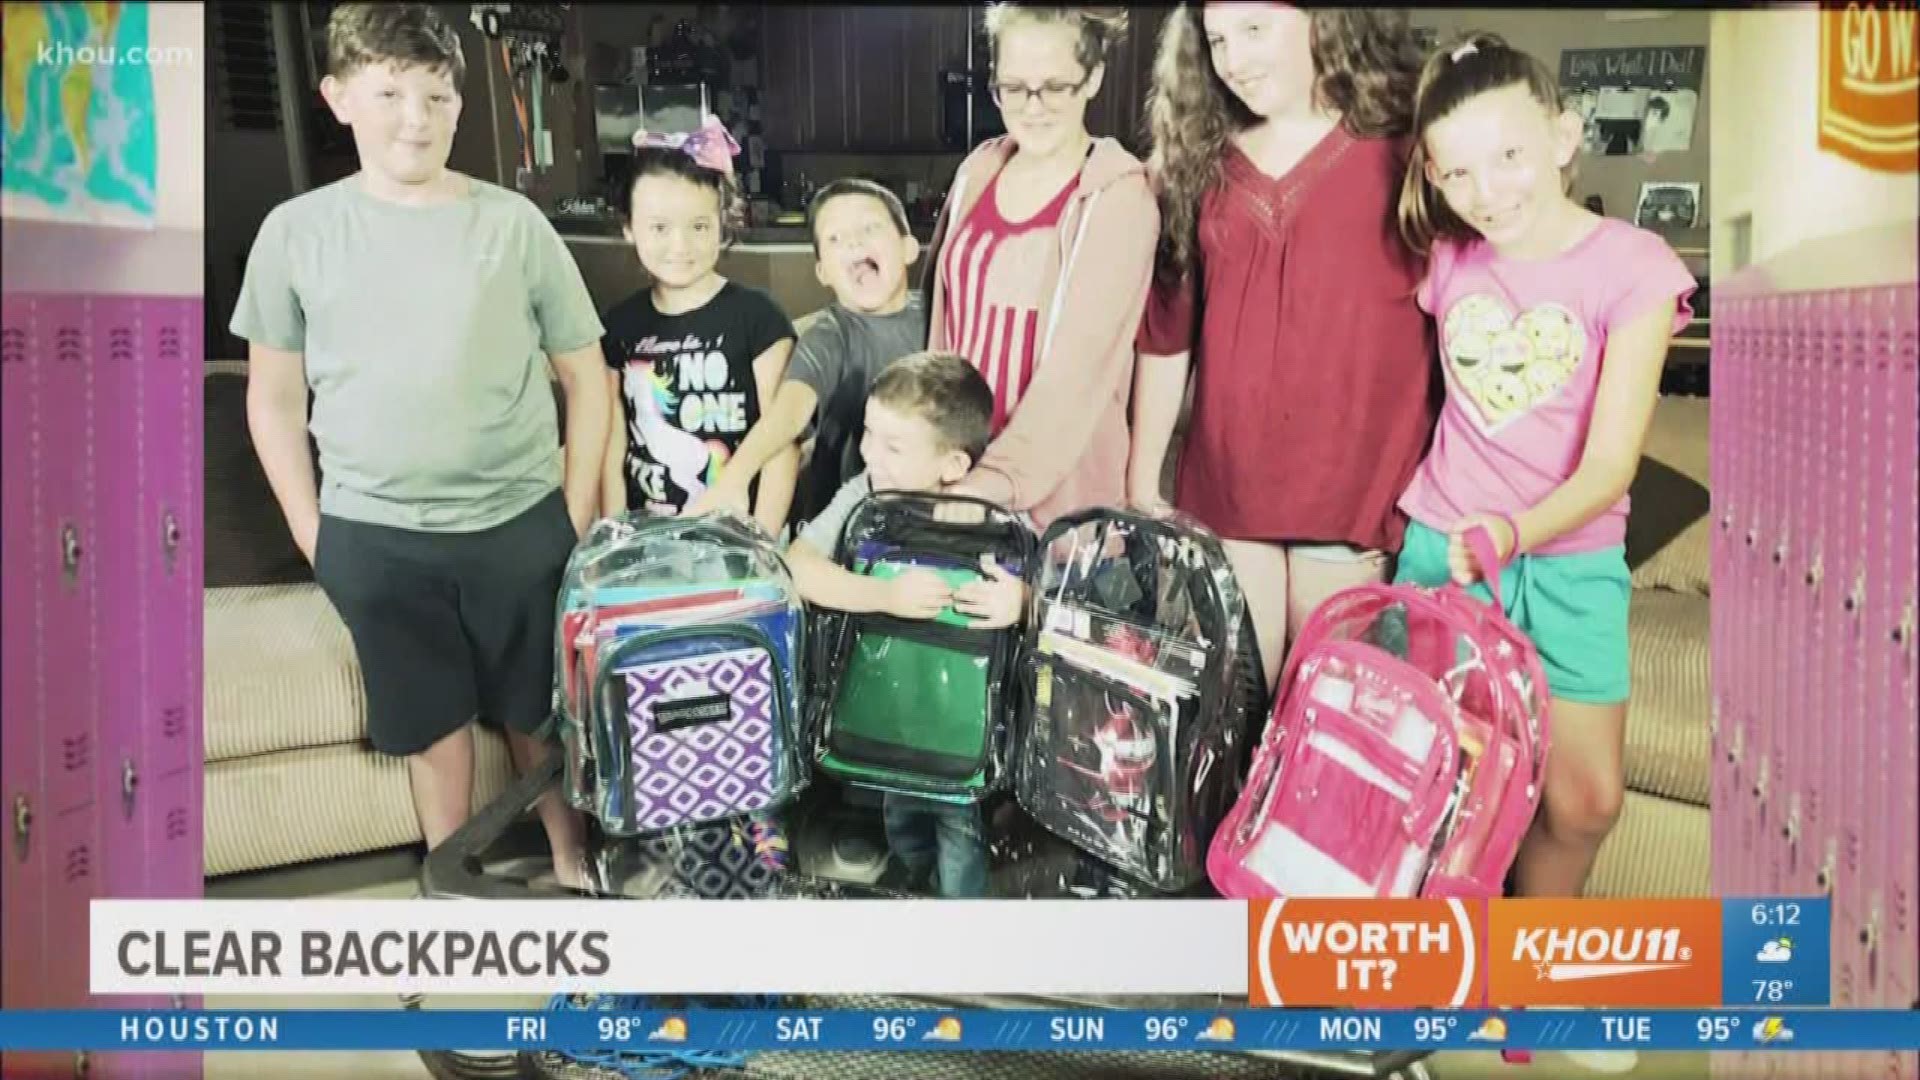 With more school districts requiring clear backpacks, KHOU 11 bought a few for testing.